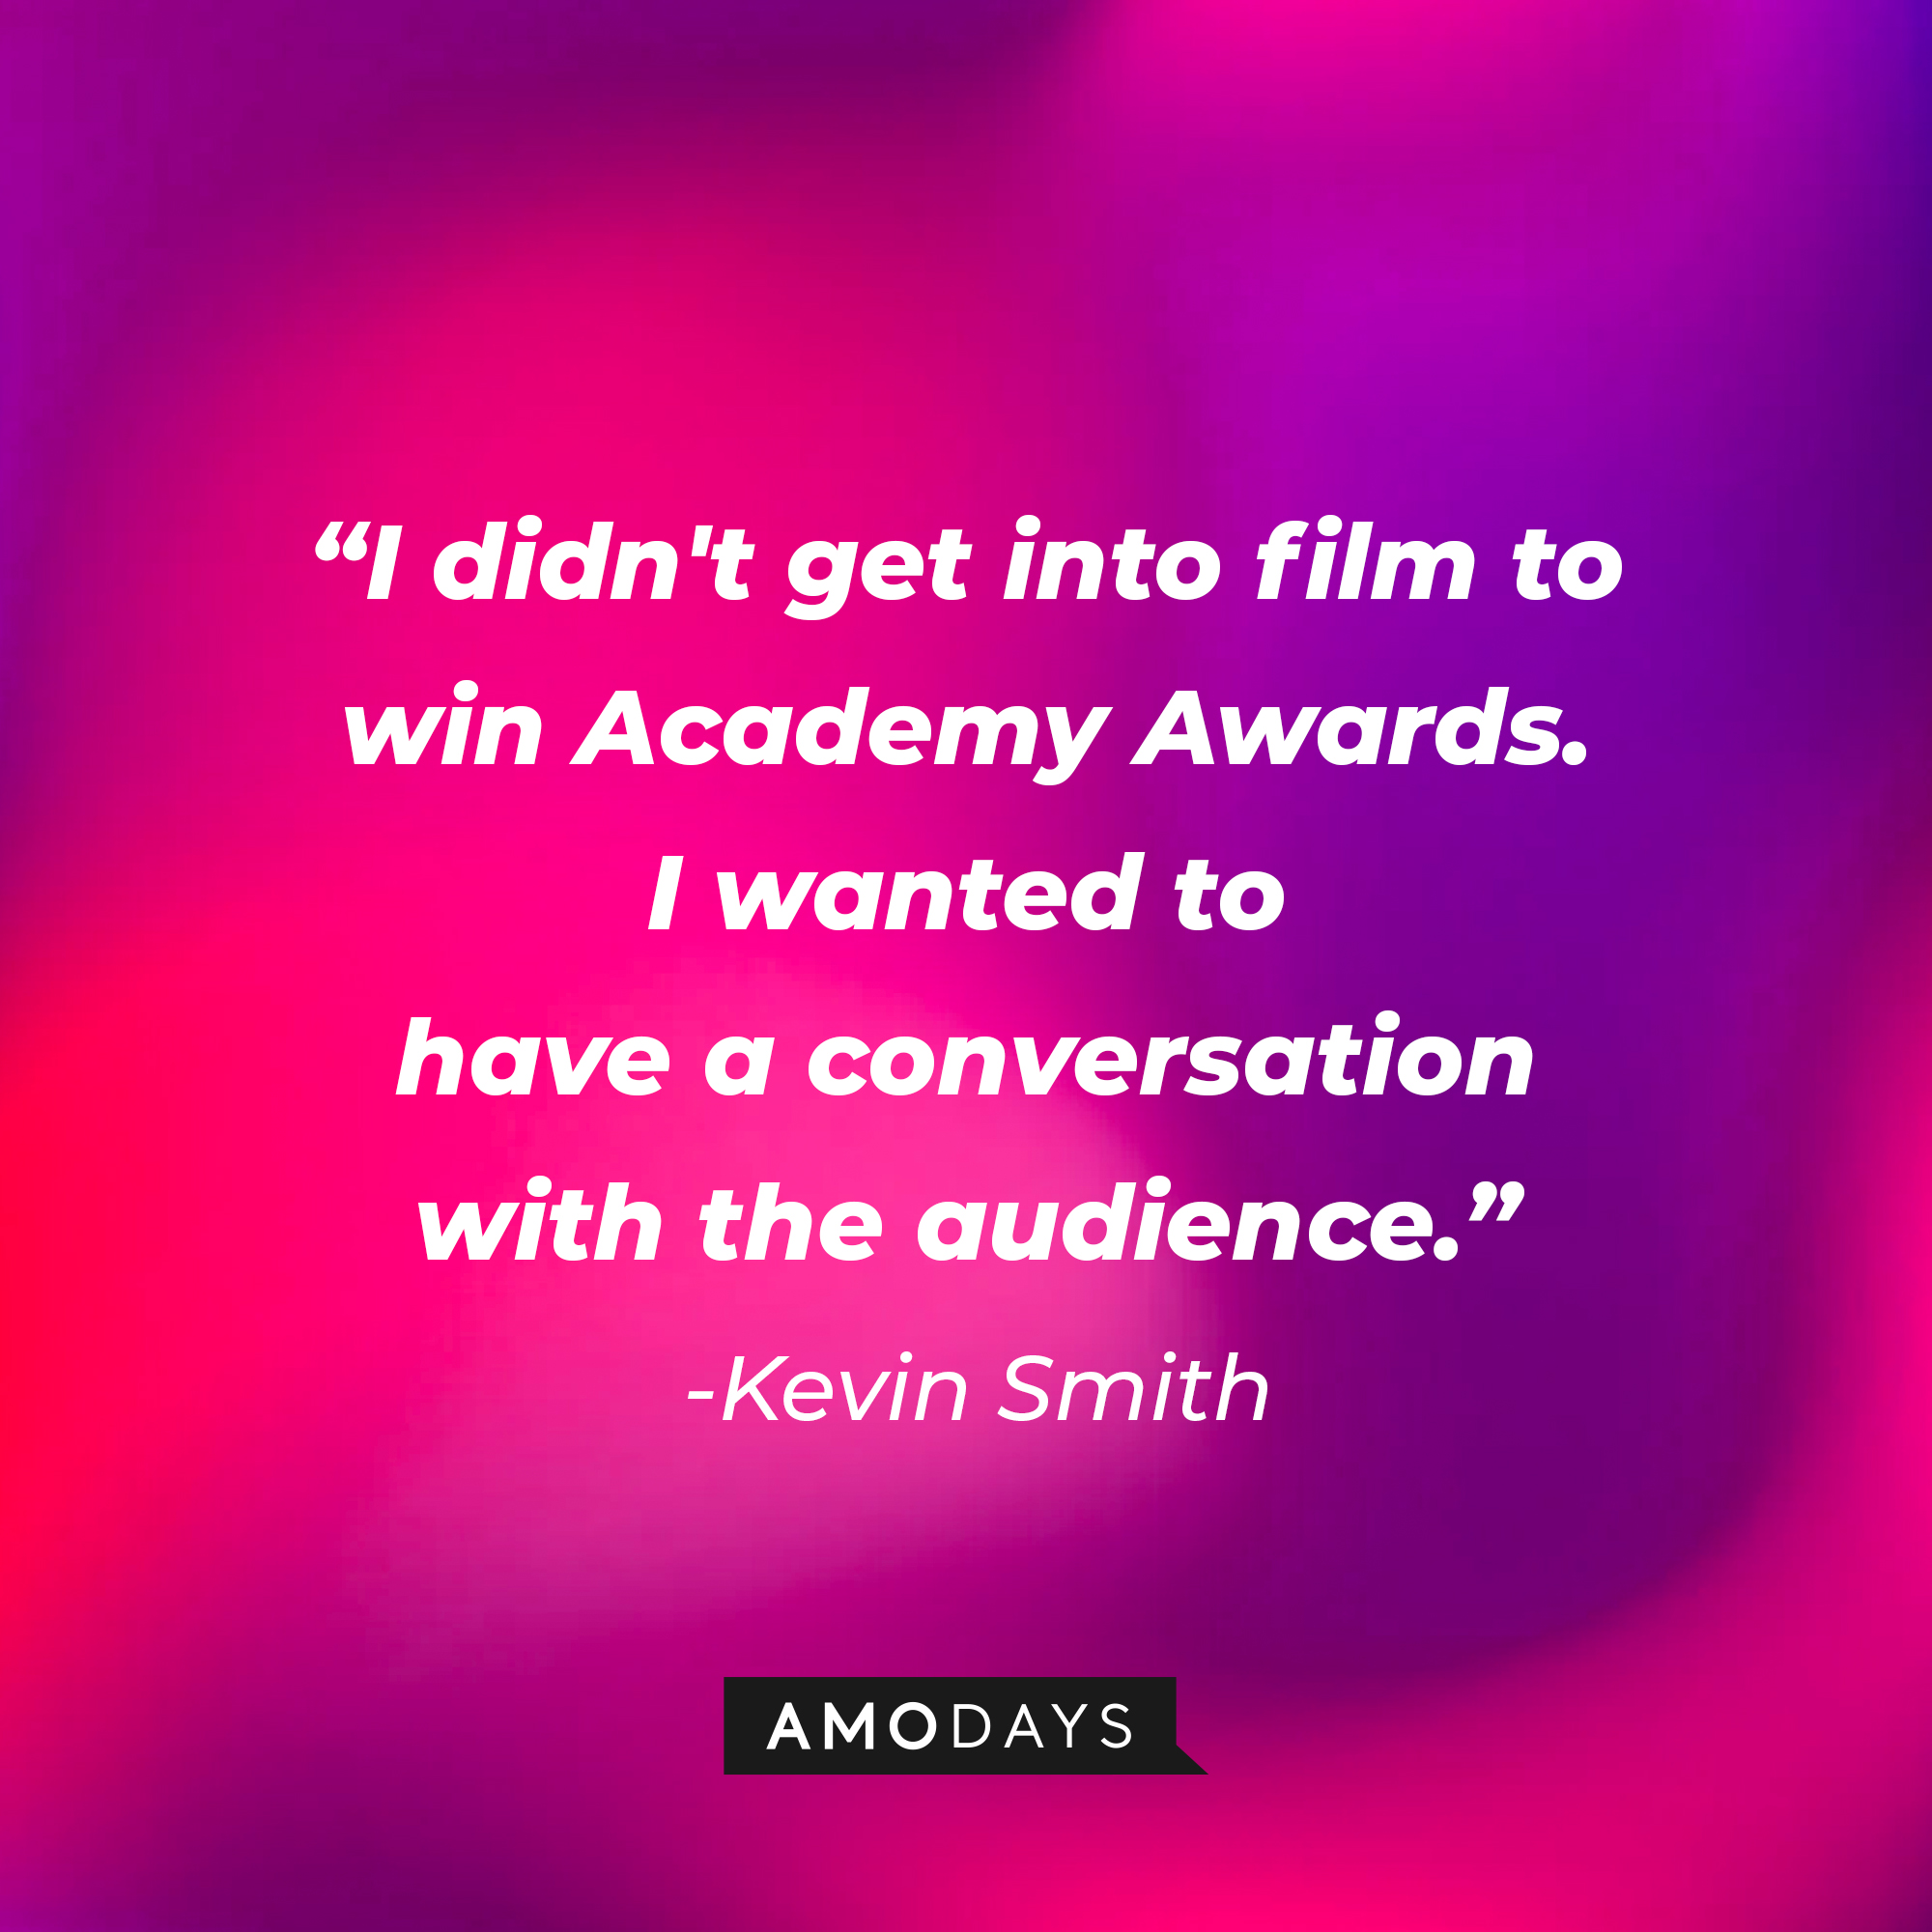 Kevin Smith’s quote: “I didn't get into film to win Academy Awards. I wanted to have a conversation with the audience.” | Source: AmoDays